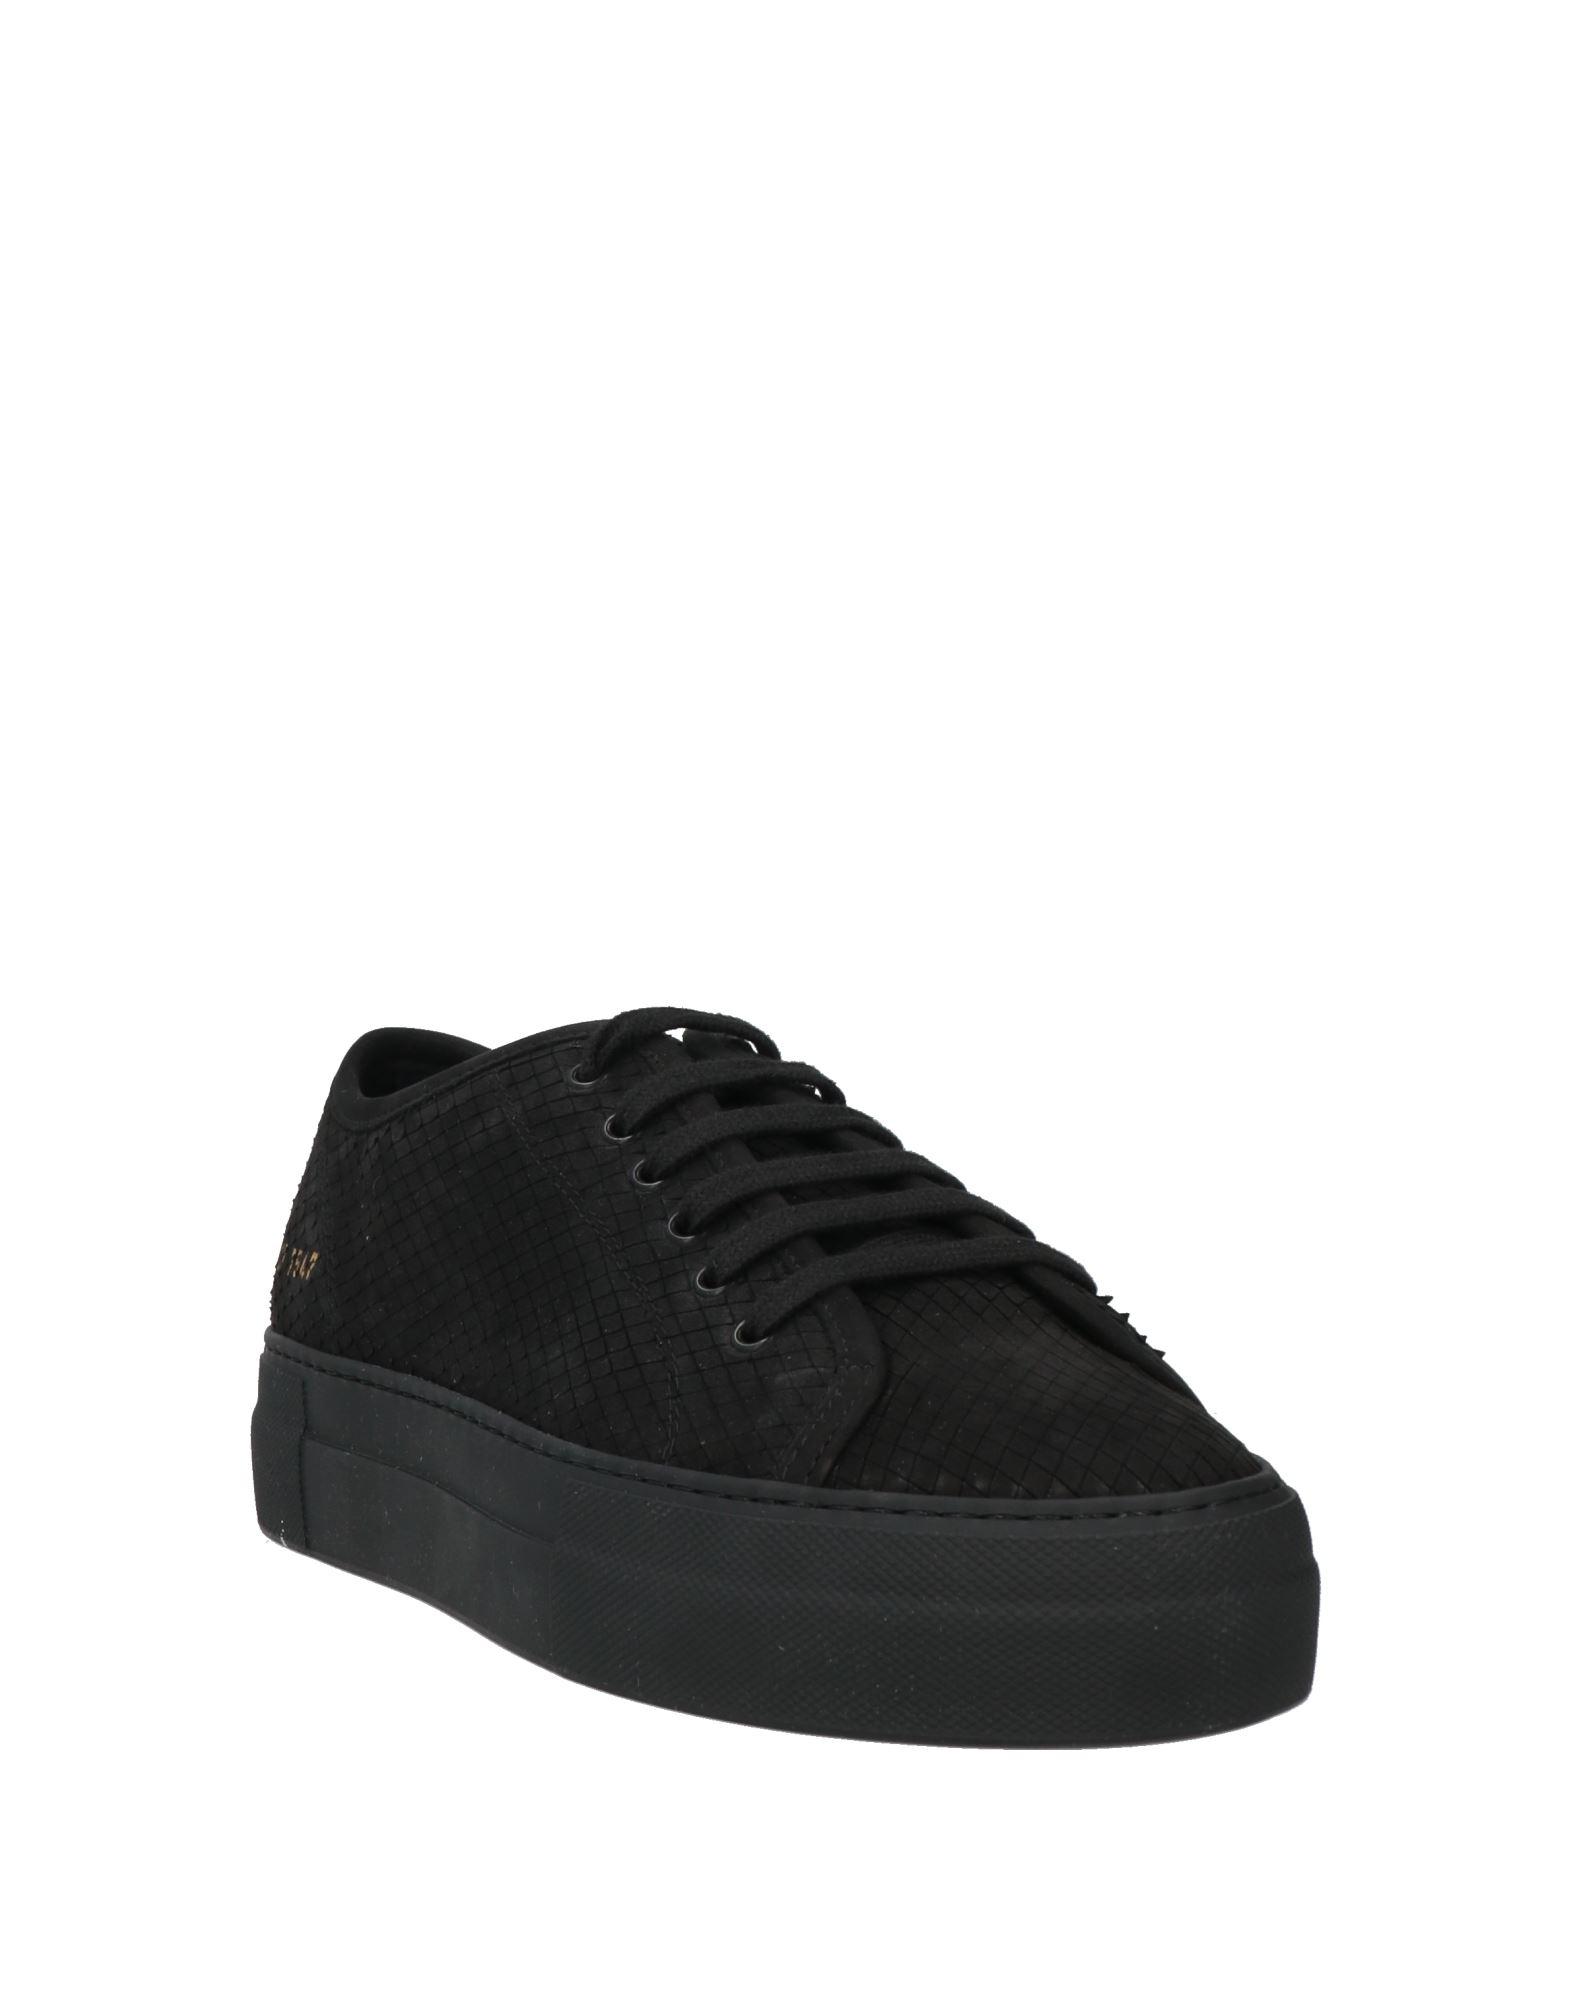 Common Projects Slip On Sneakers in Black | Lyst